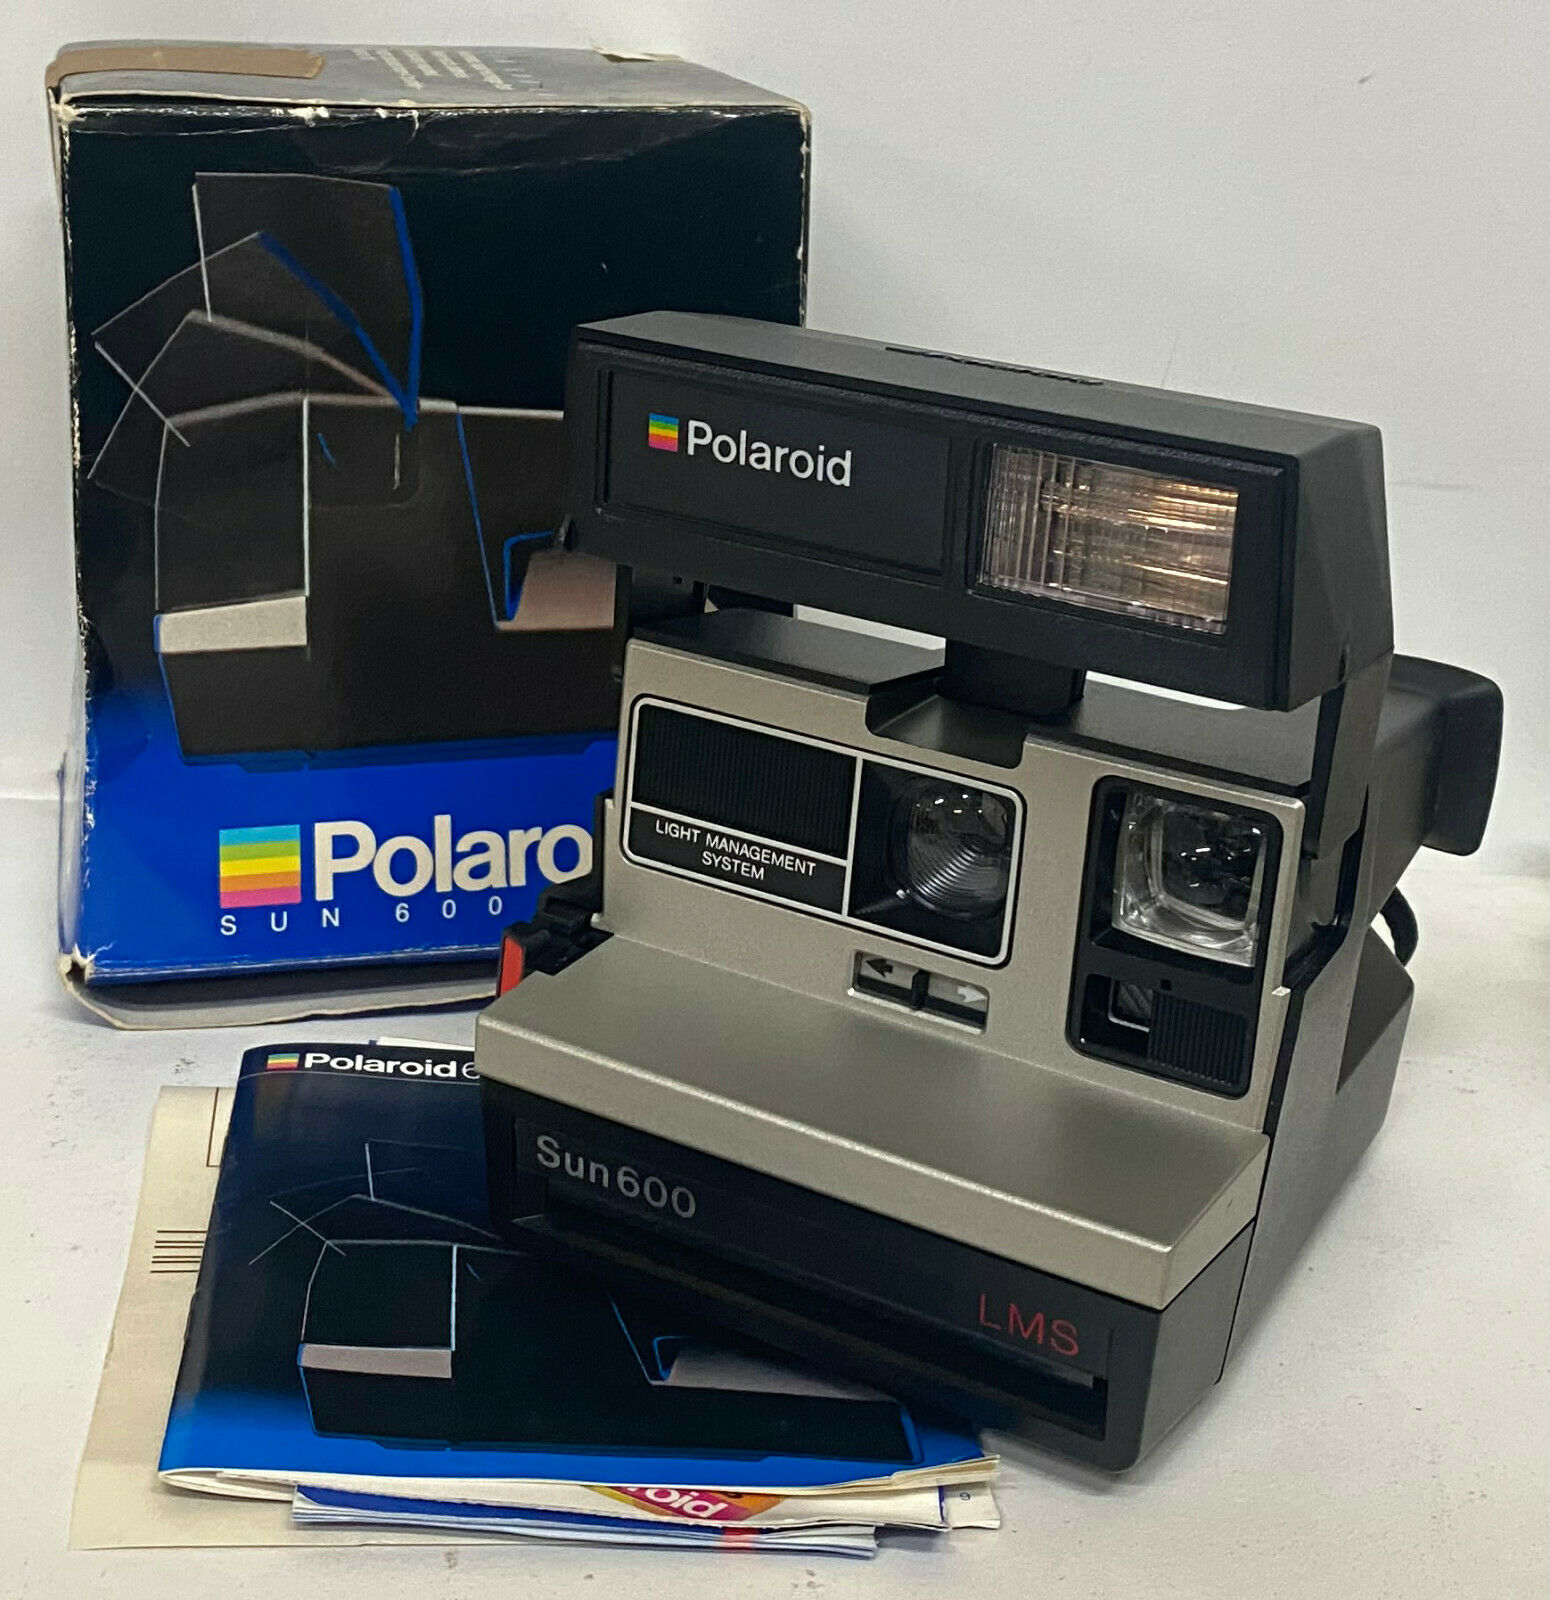 Vintage Polaroid Instant Camera Sun 600 Lms With Box Great Condition